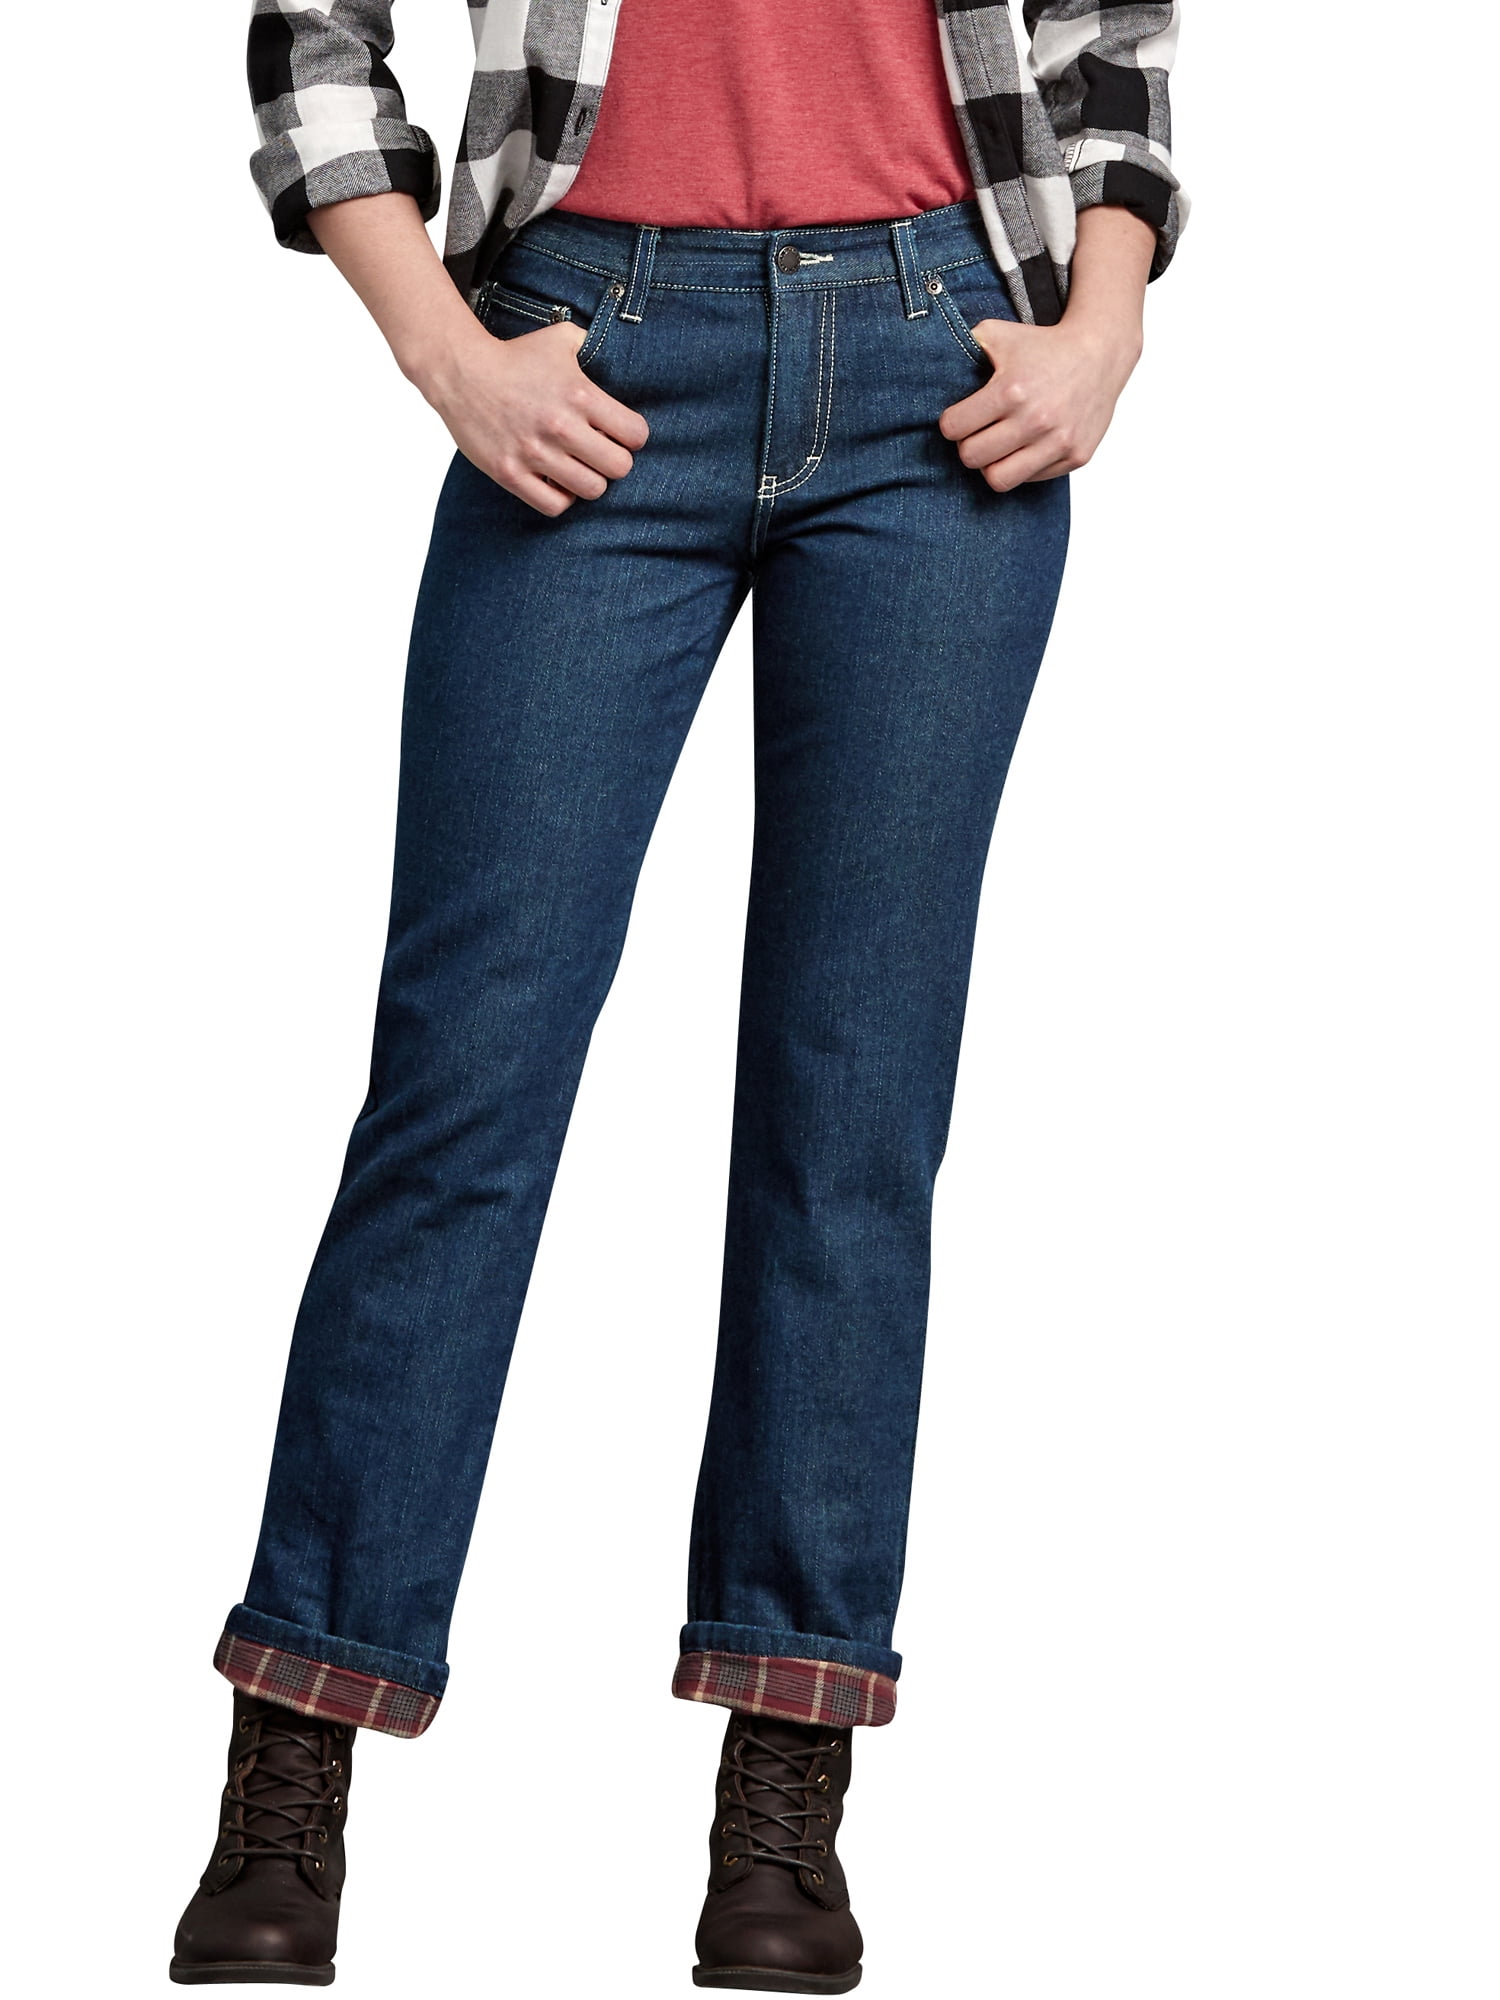 flannel lined womens pants